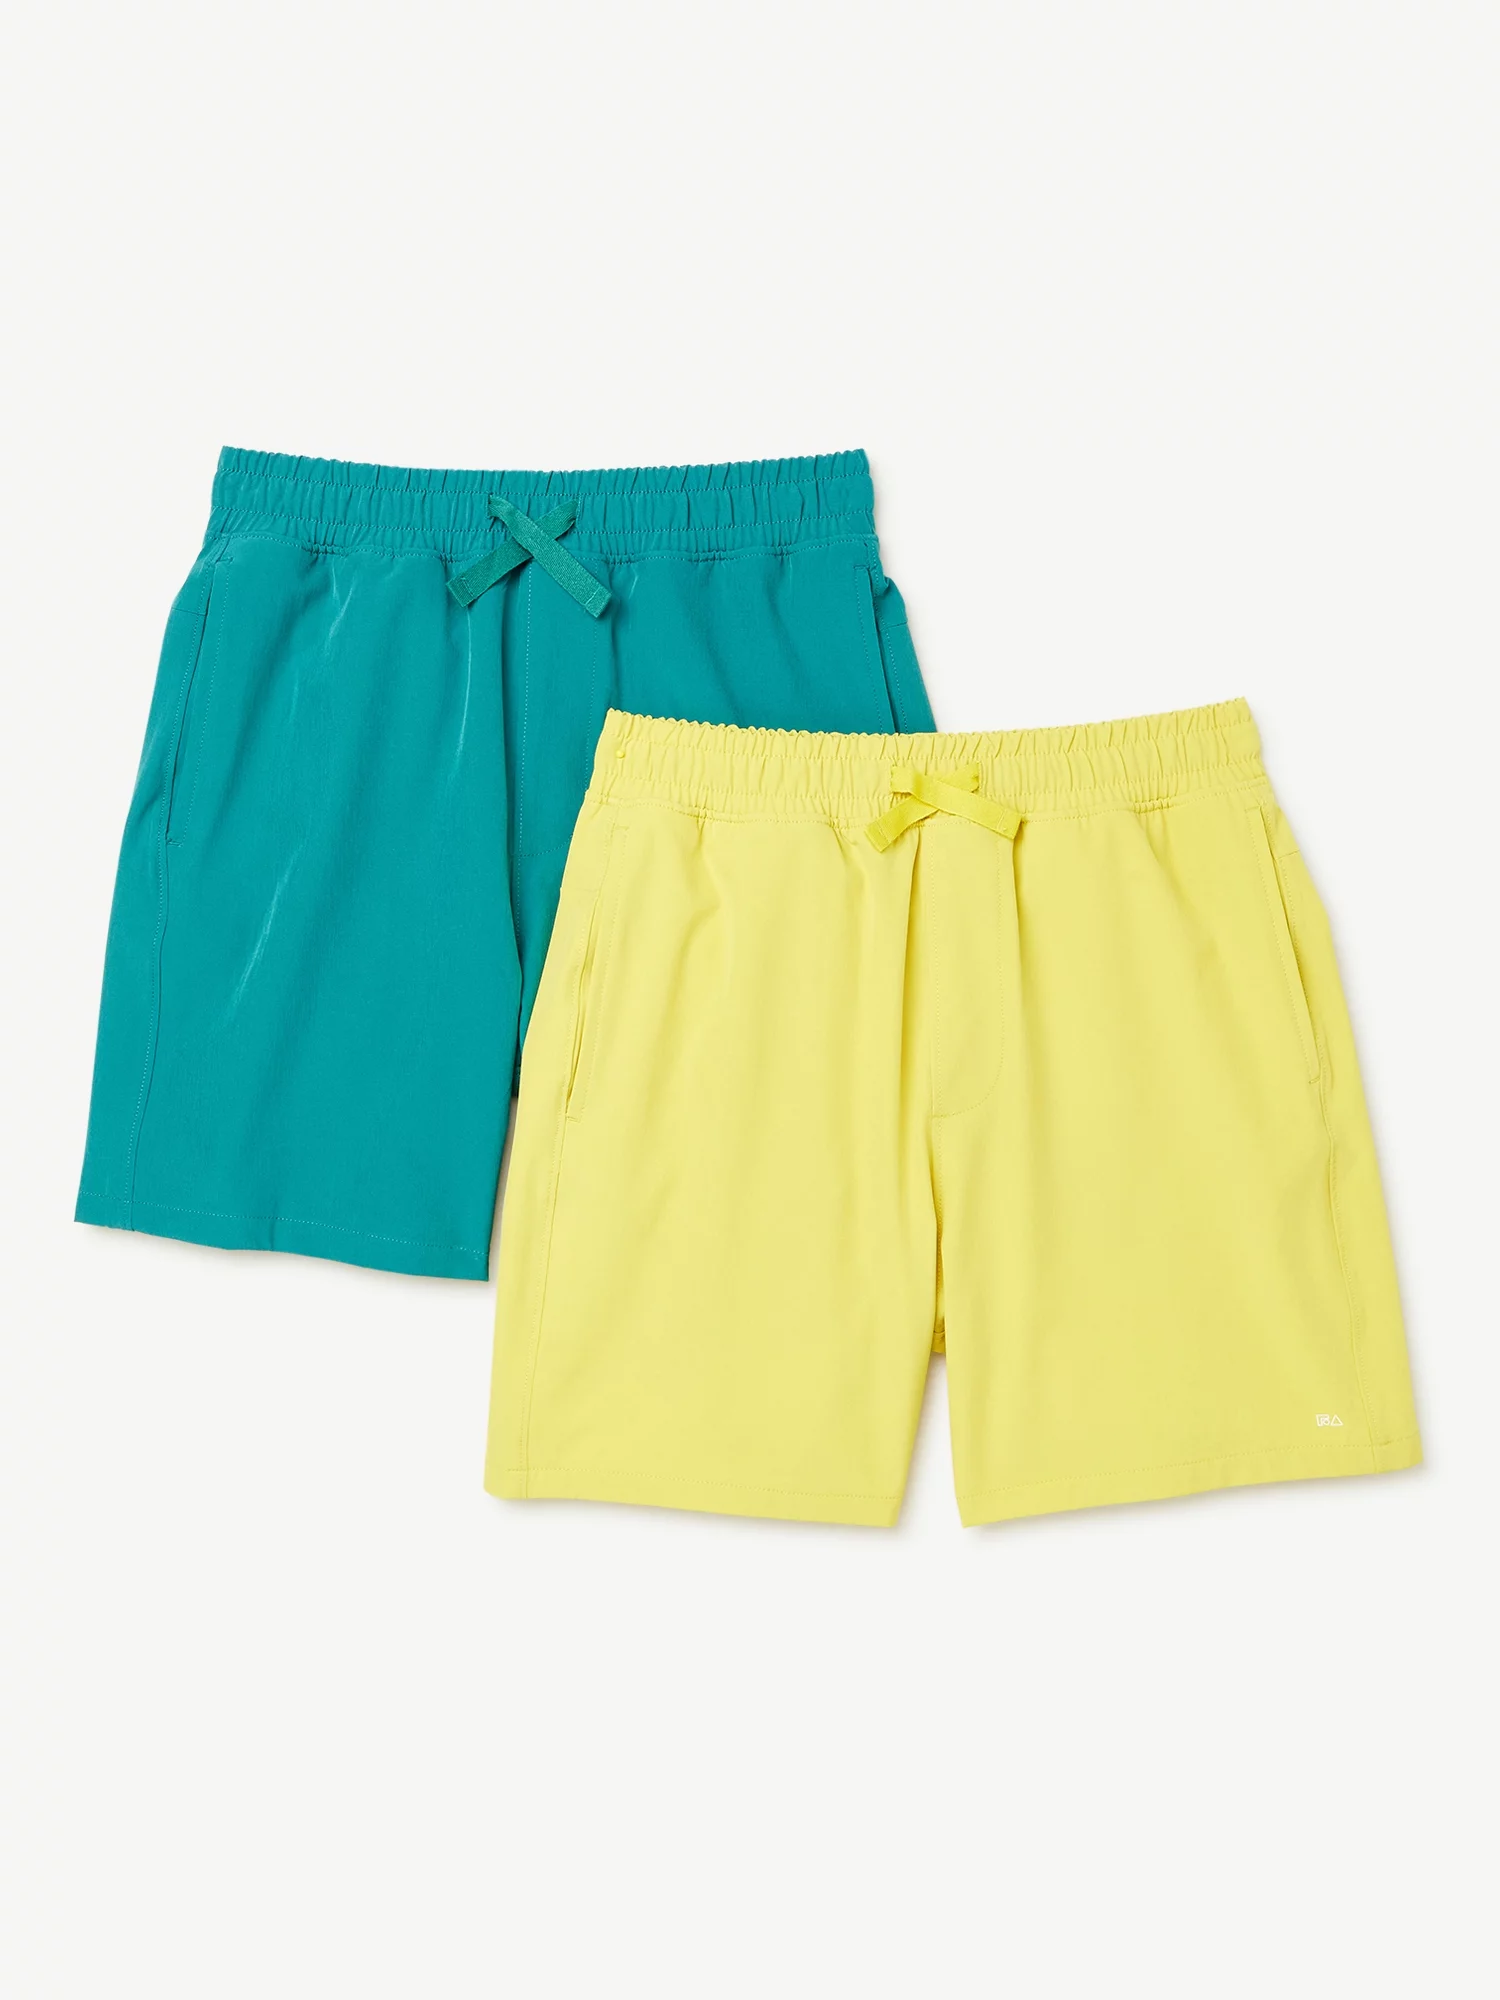 Free Assembly Boys 4-Way Active Stretch Shorts, 2-Pack, Sizes 4-18